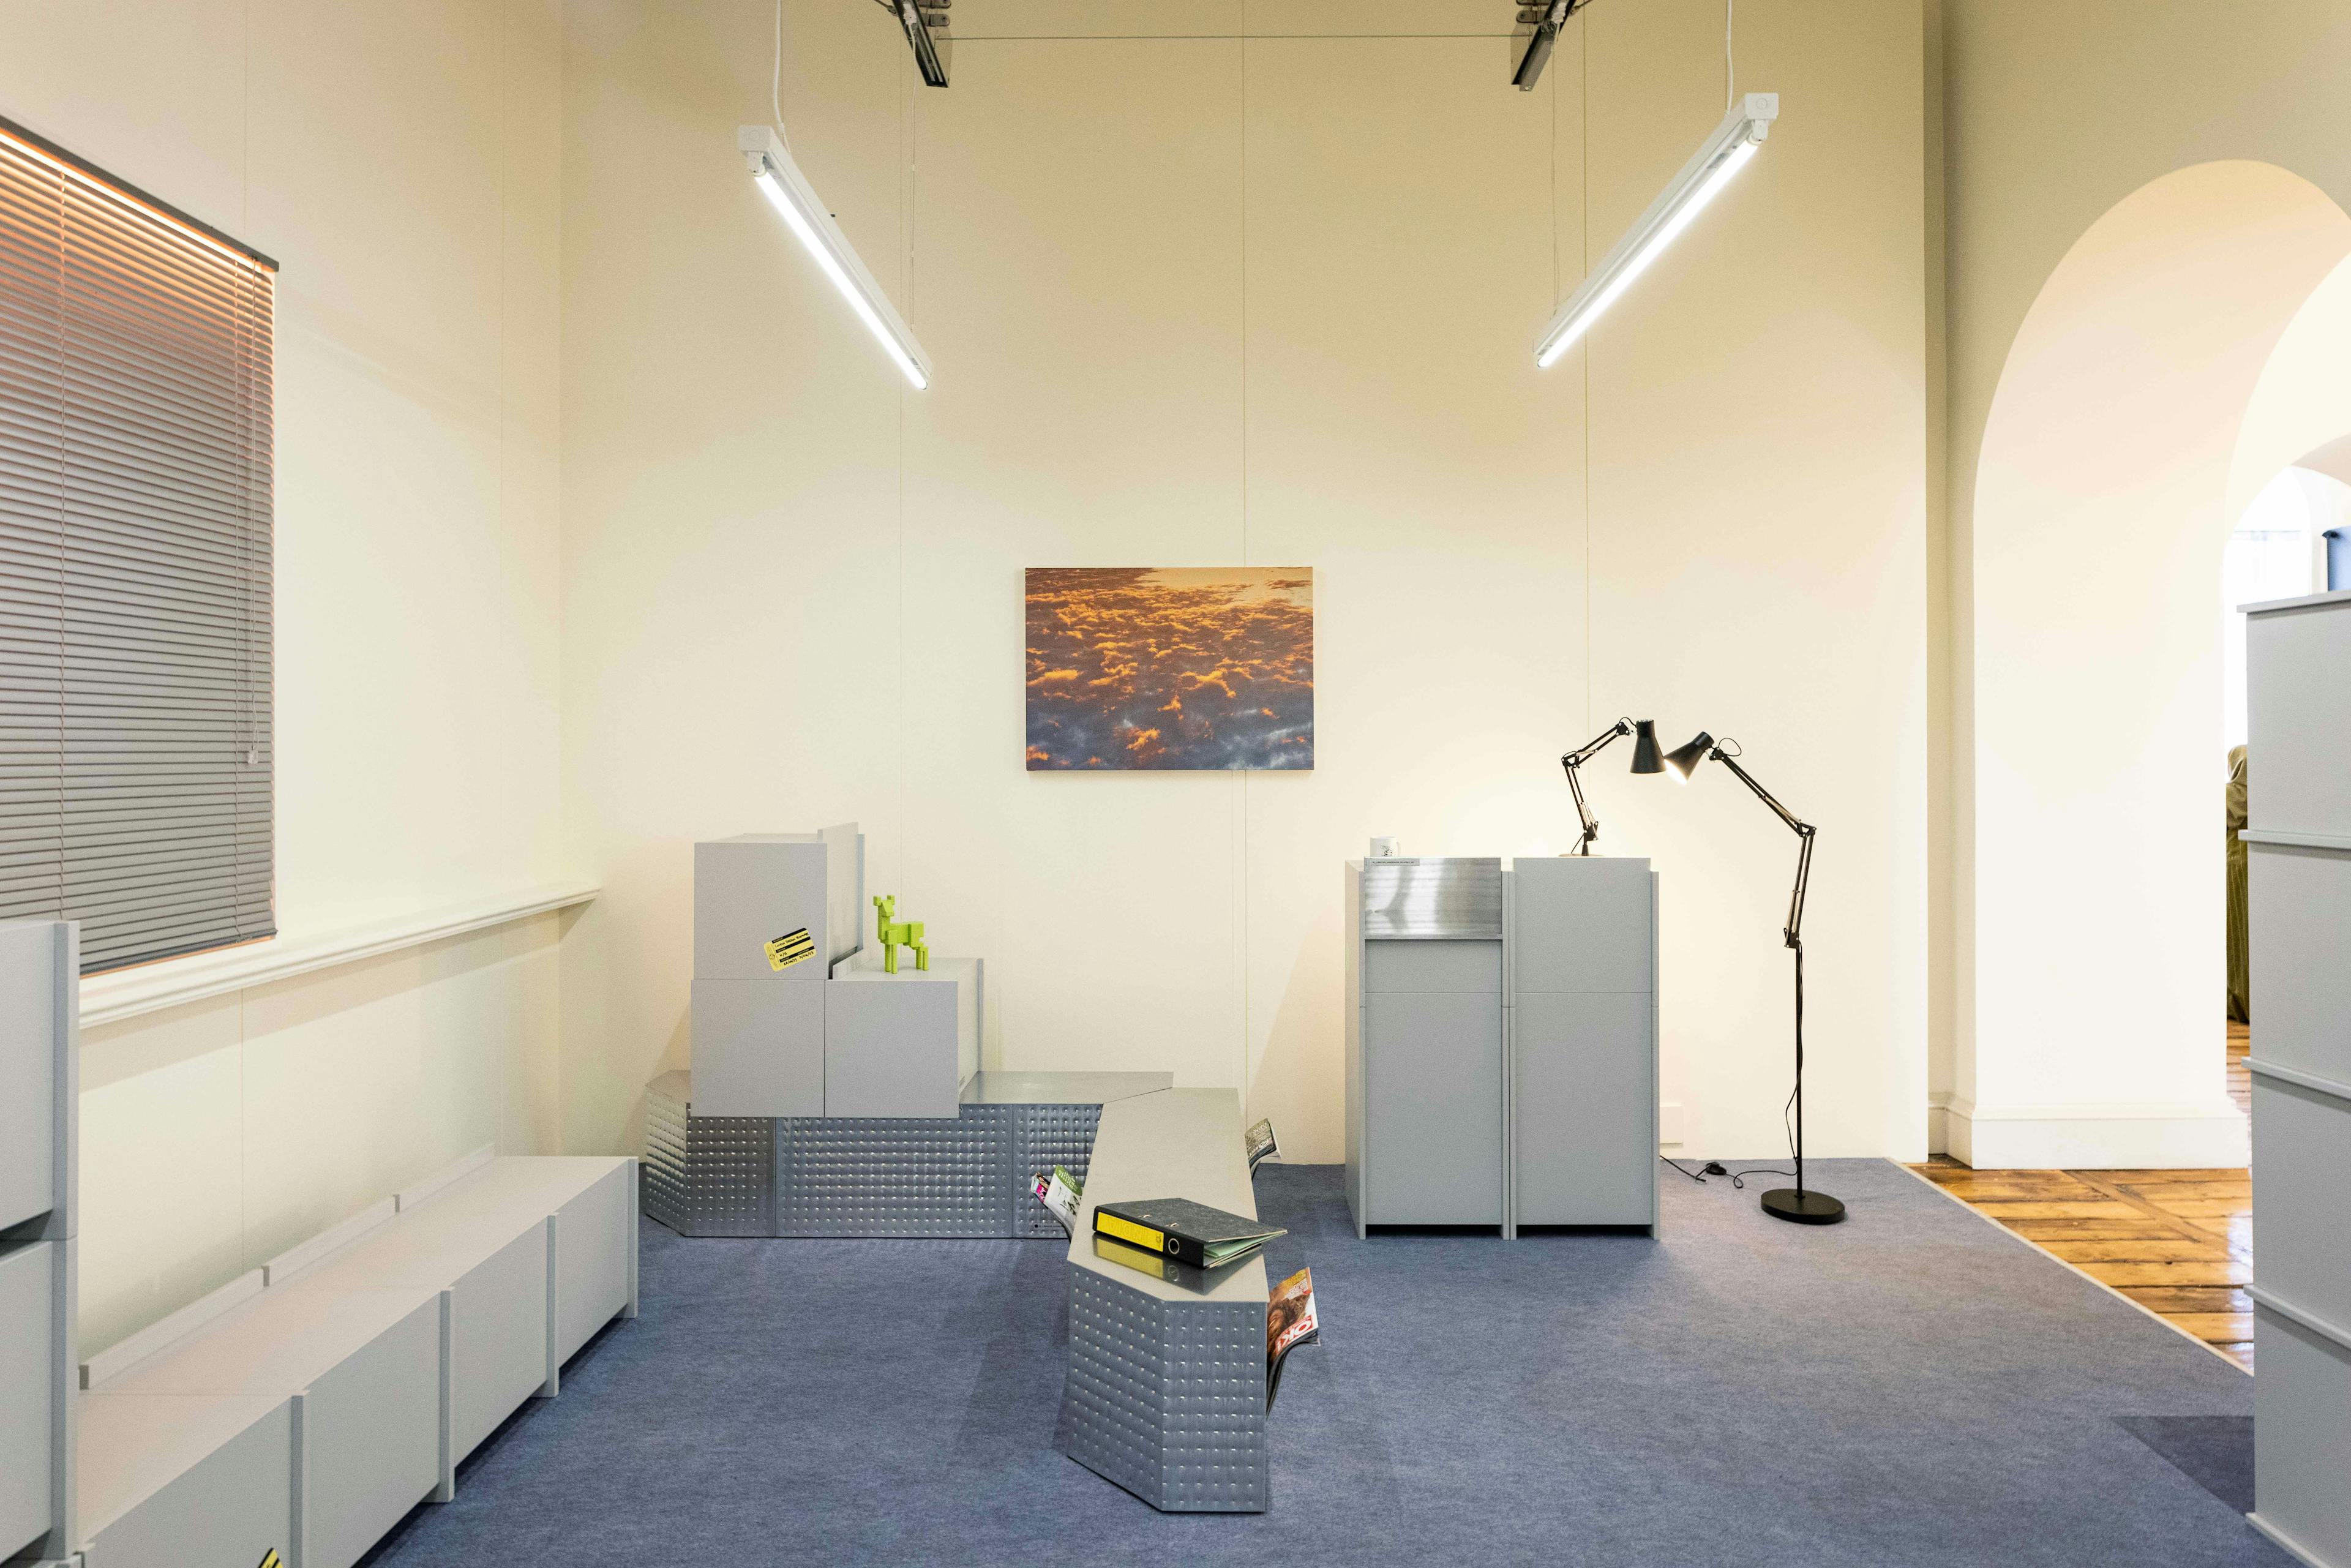 An exhibition space with objects that stereotypically depict an office environment: cabinets, lamps, TL lighting, etc. 